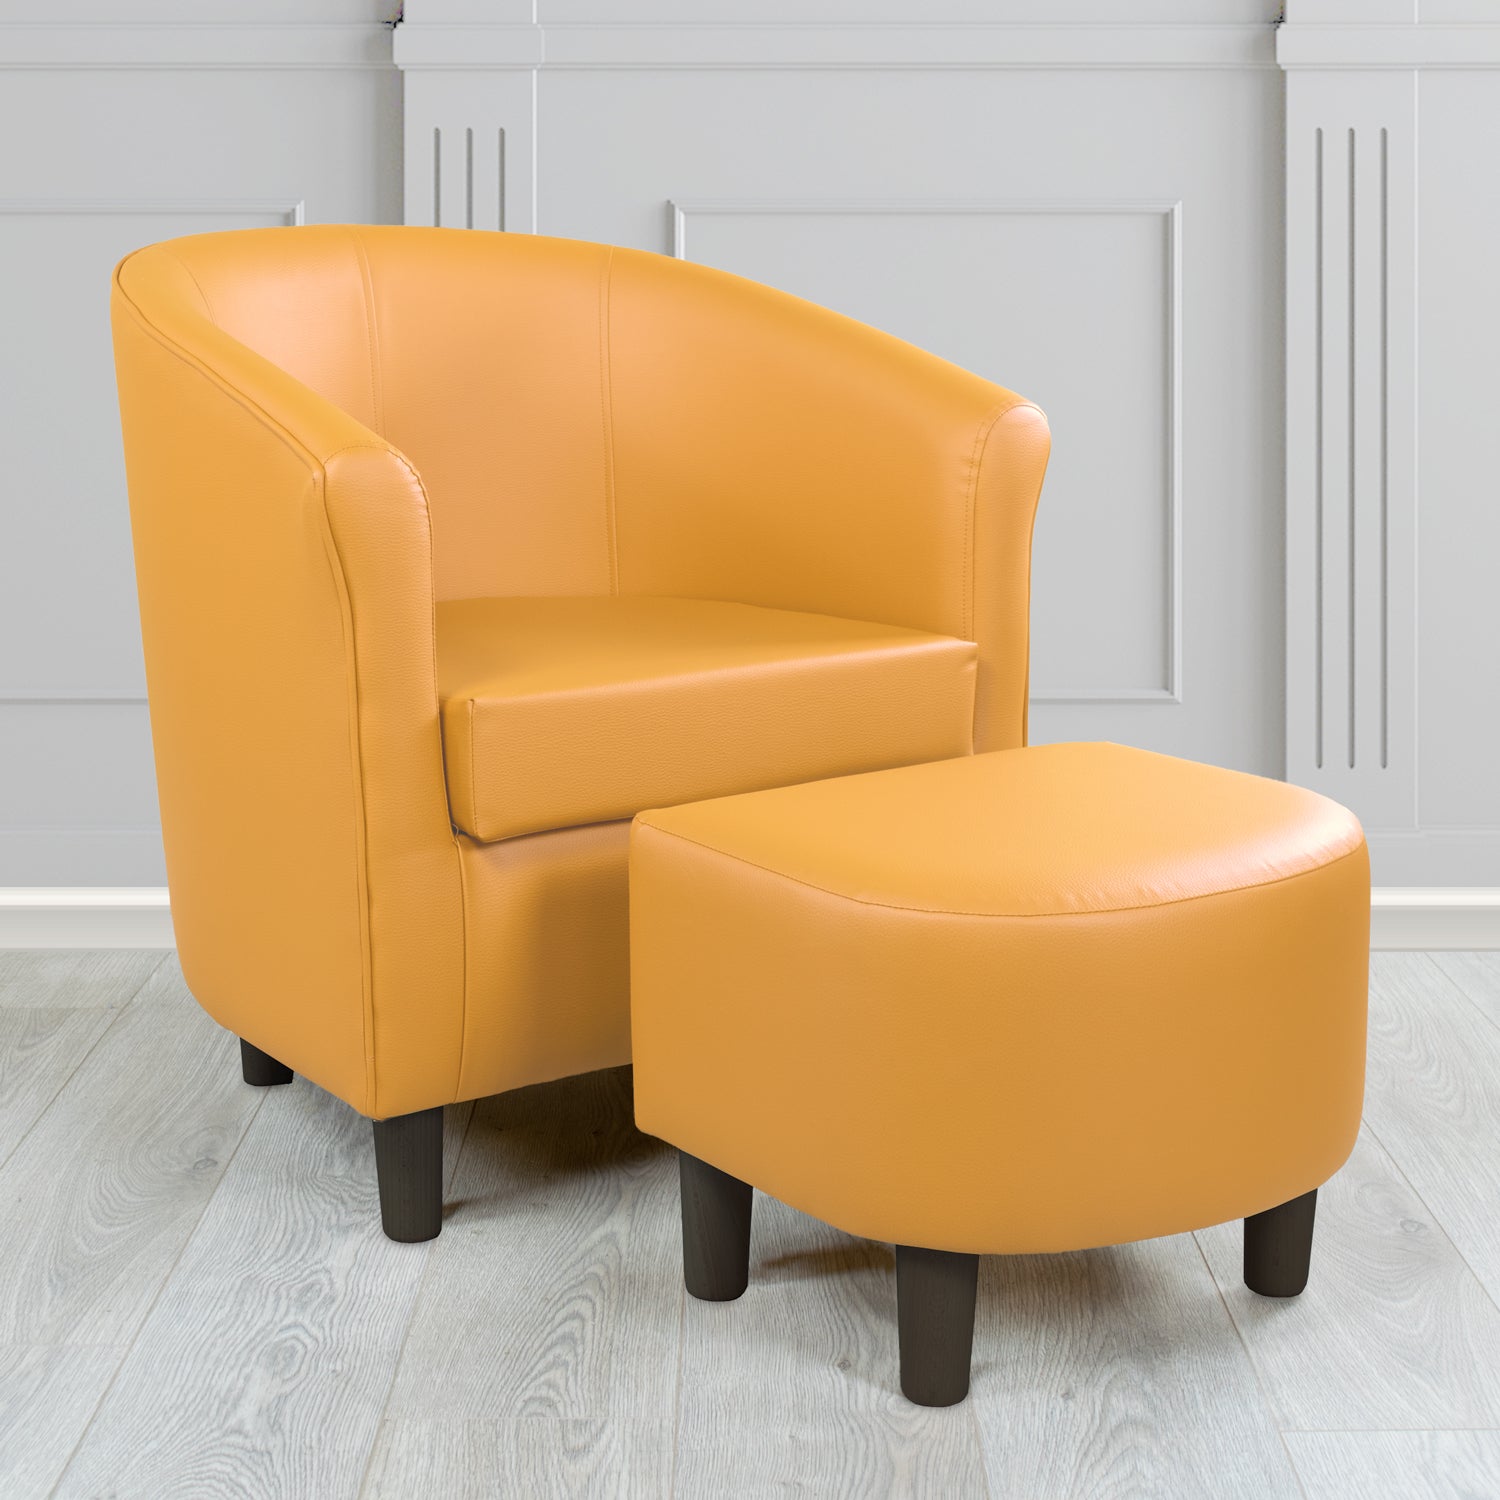 Tuscany Just Colour Sunblush Faux Leather Tub Chair with Footstool Set - The Tub Chair Shop